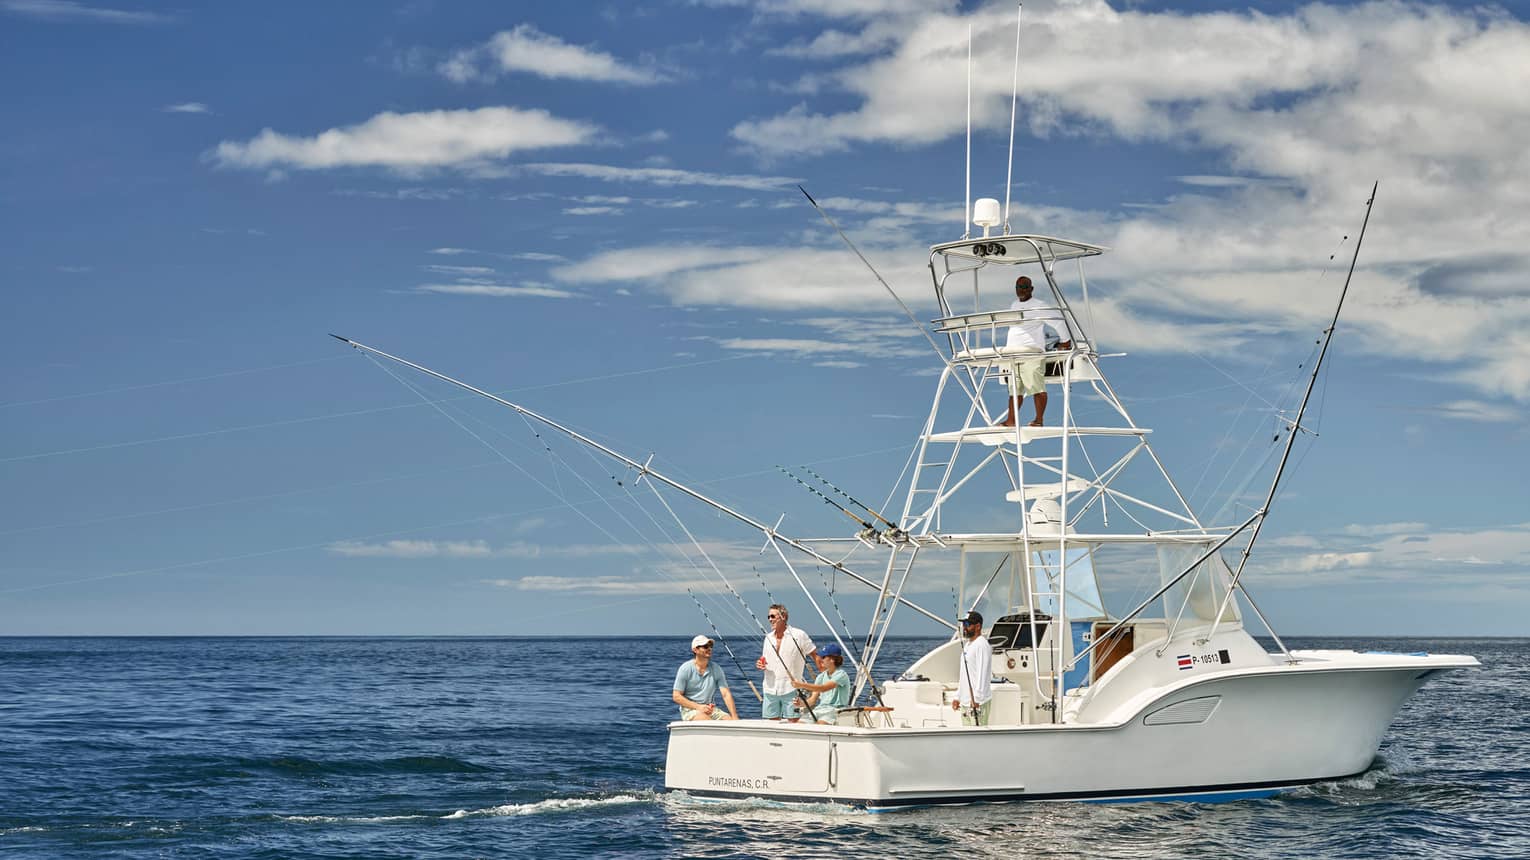 Four smiling guests on a fishing boat, a guide perched on a high platform lookout, on deep-blue water under a clear sky.